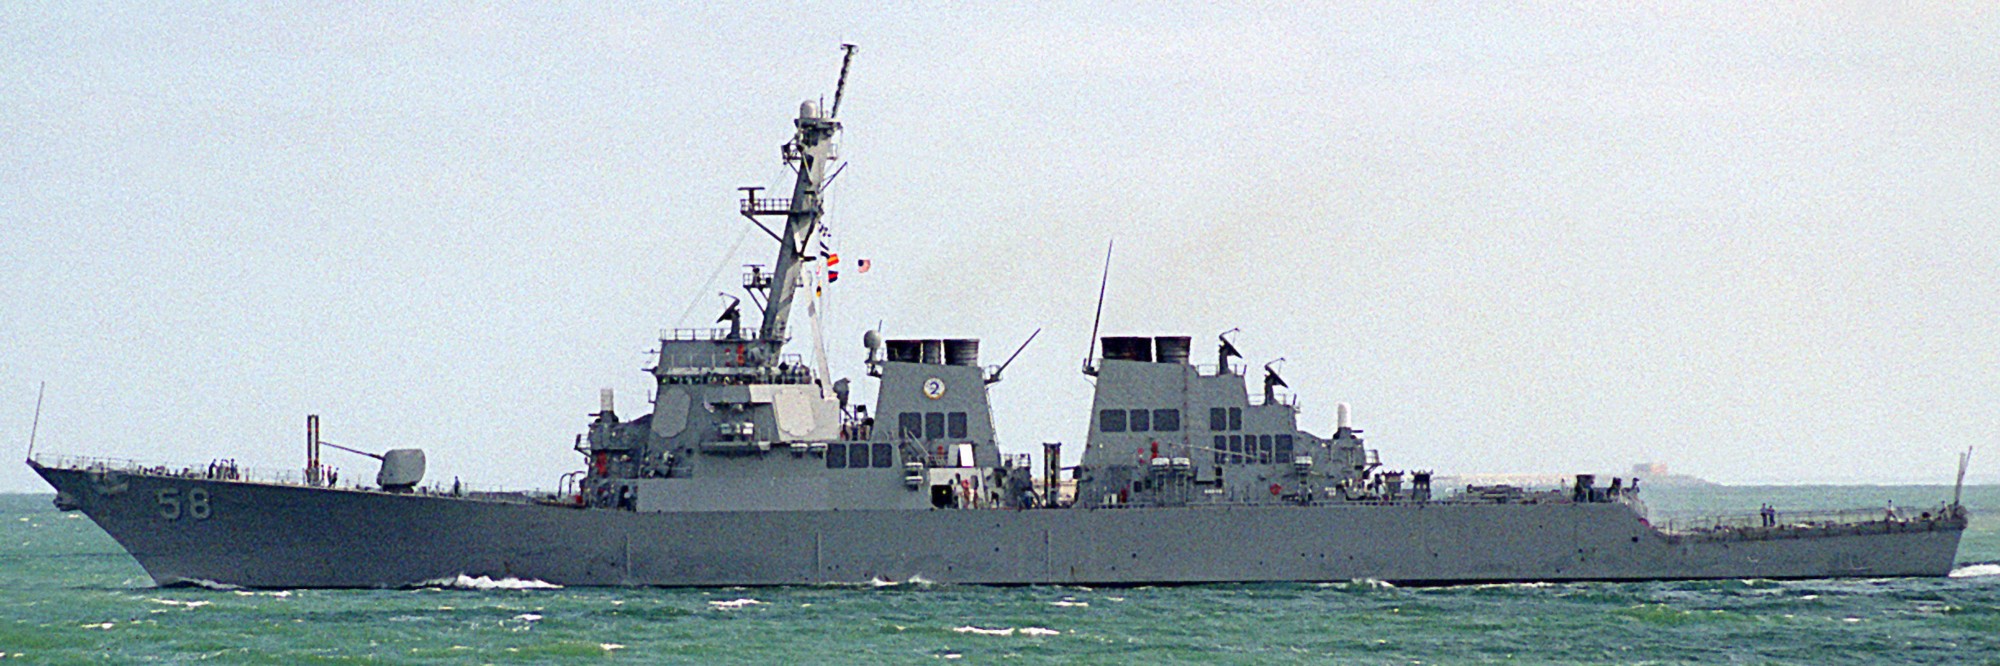 ddg-58 uss laboon guided missile destroyer us navy 74